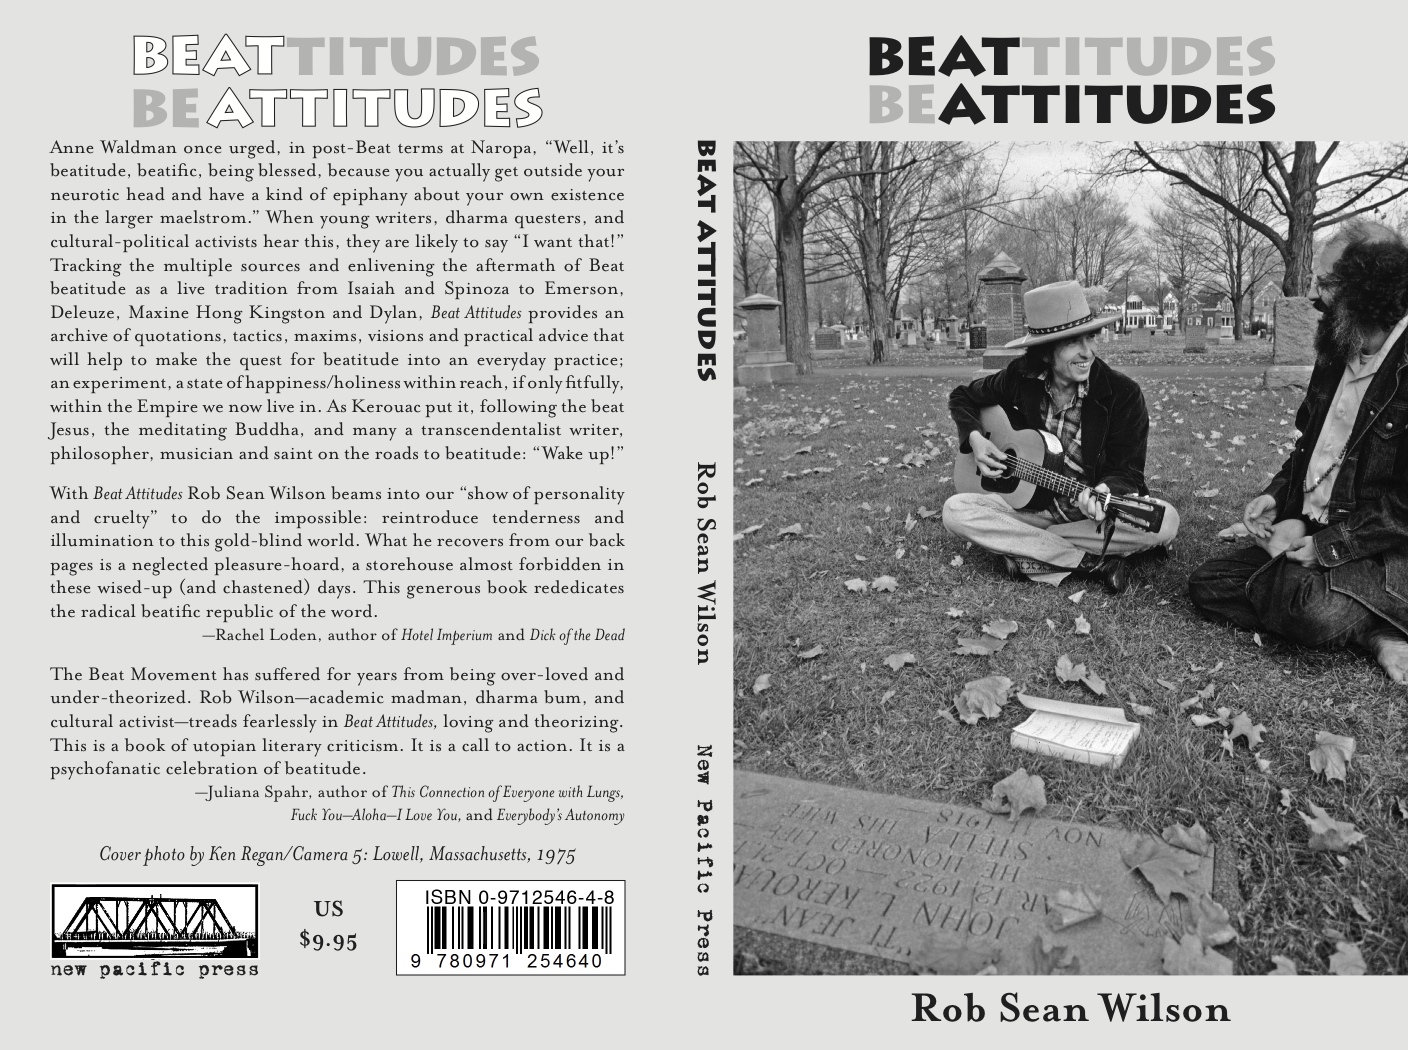 This is the full cover of Rob Sean Wilson’s original book of poetry, titled "Beat Attitudes: On the Roads to Beatitude for Post-Beat Writers, Dharma Bums, and Cultural-Political Activists".